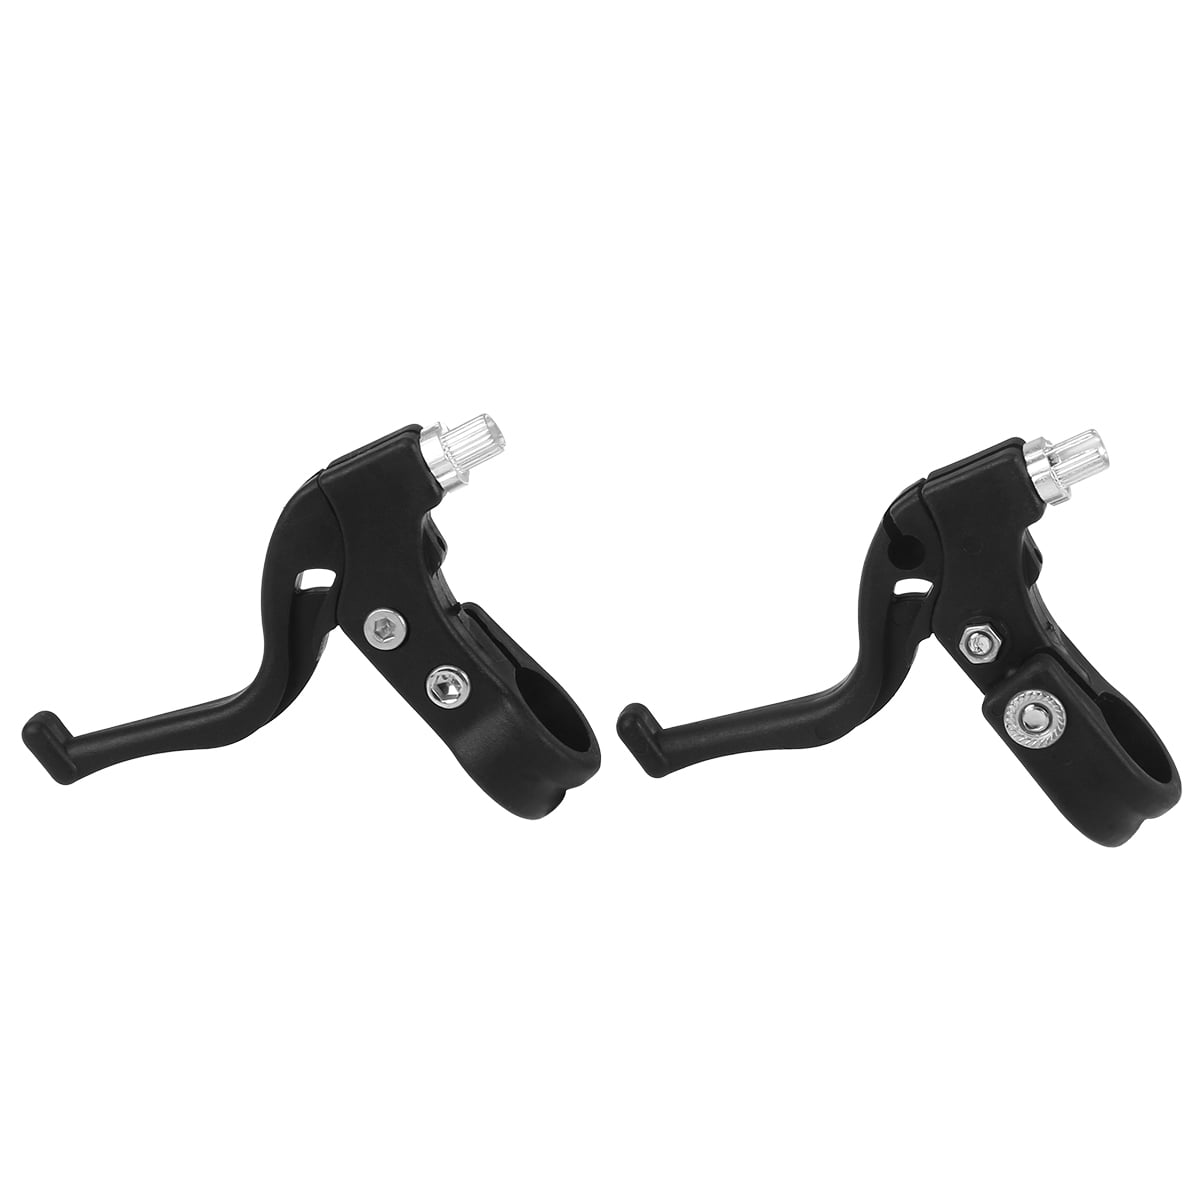 Bike Bicycle Brake Levers For Kids Child Quick Install Replacement Supplies 2pcs 